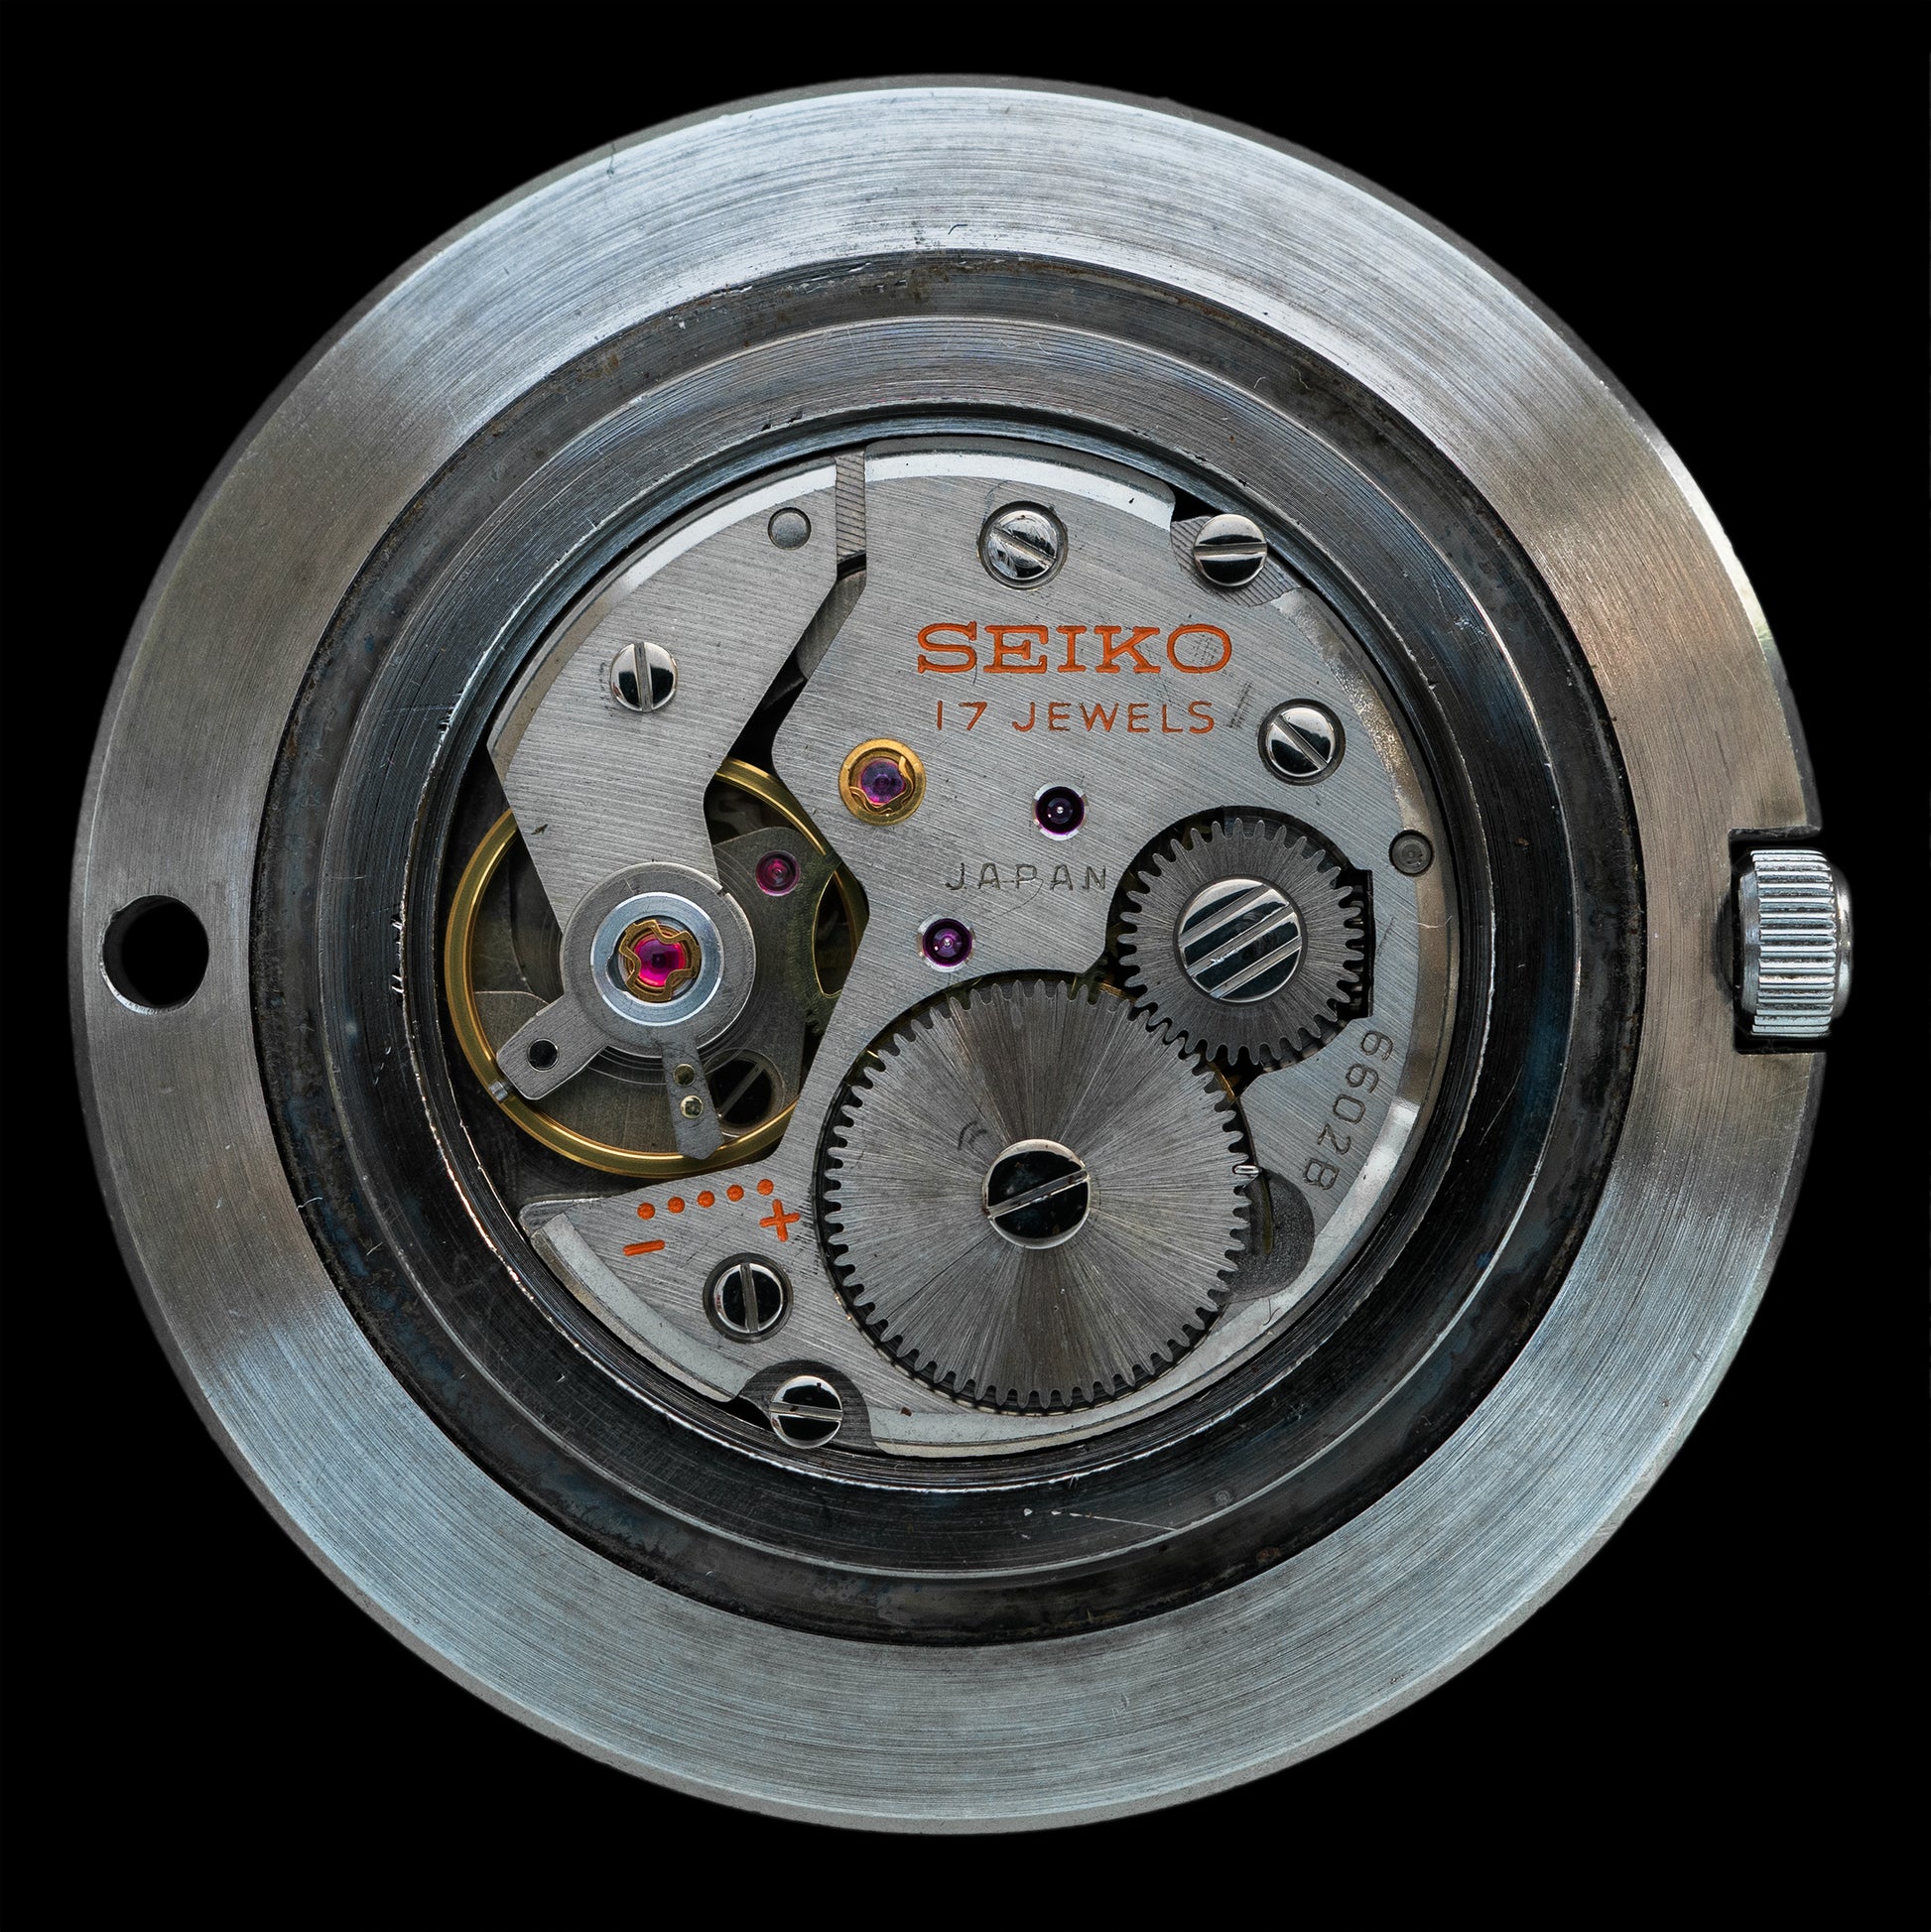 339 / Seiko Pocket Watch - 1969 – From Time To Times